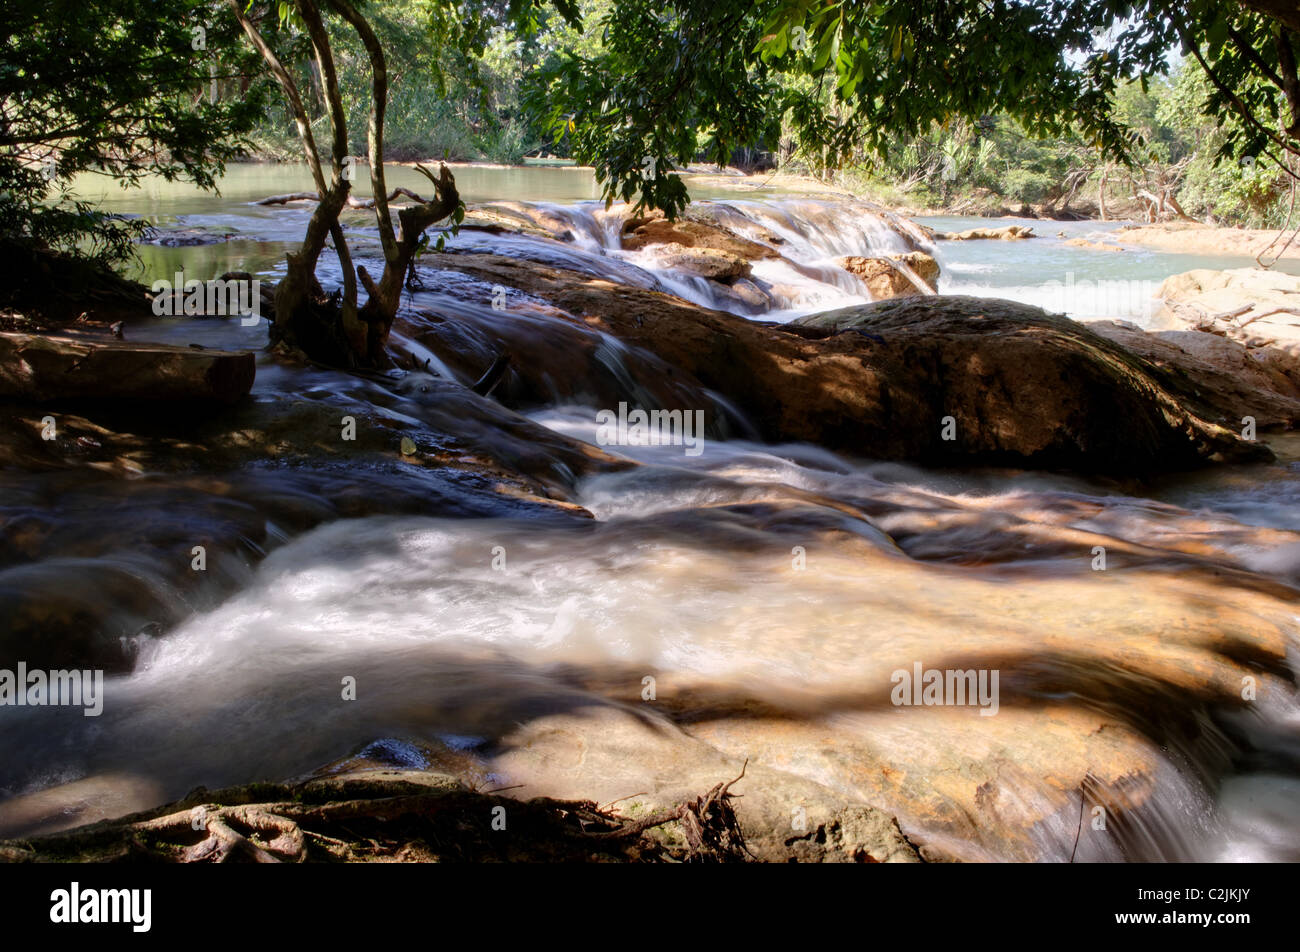 View of the Agua azul waterfalls in Chiapas, Mexico Stock Photo